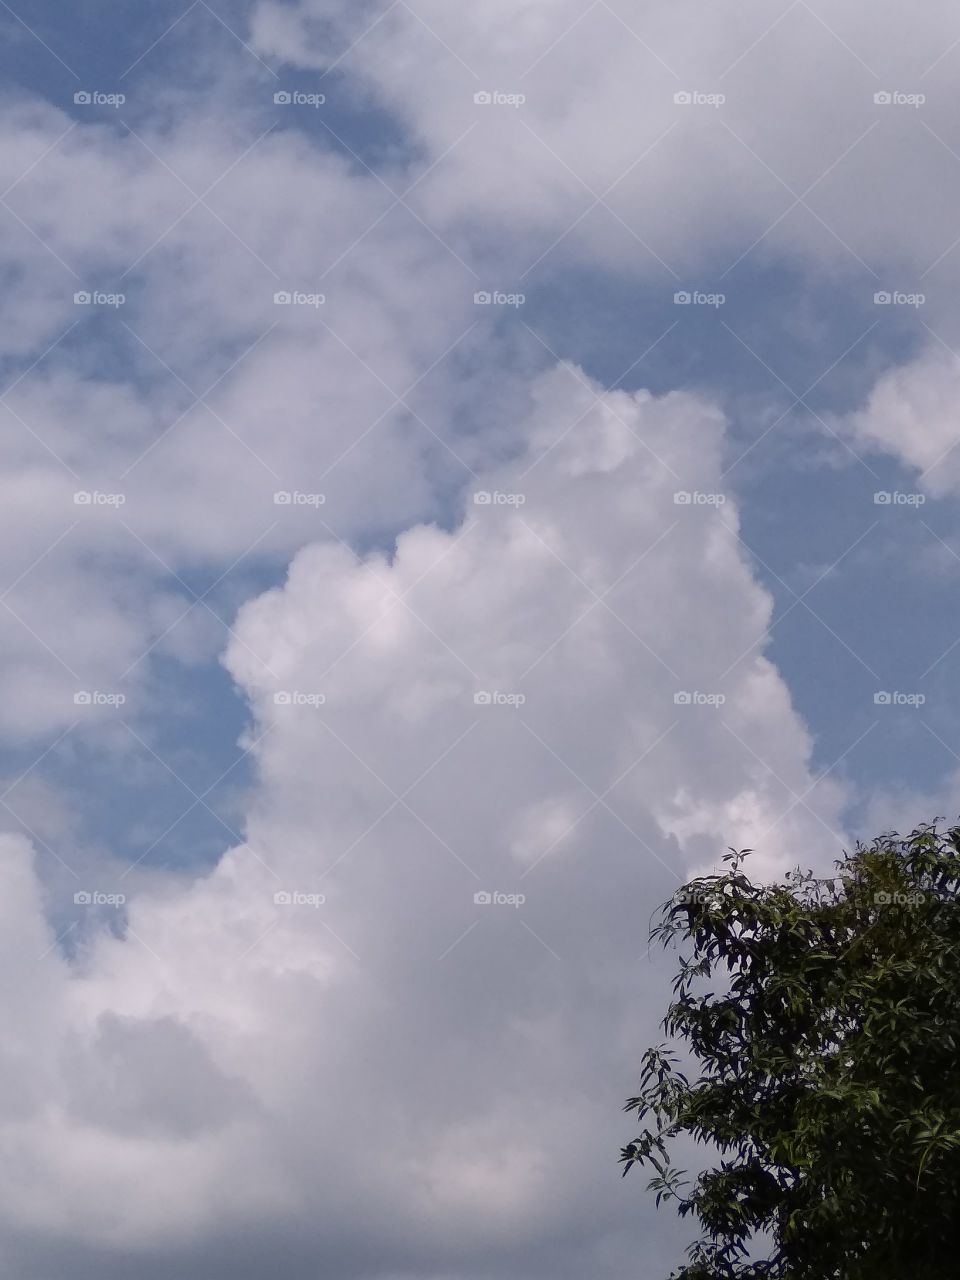 Cool clouds in the sky